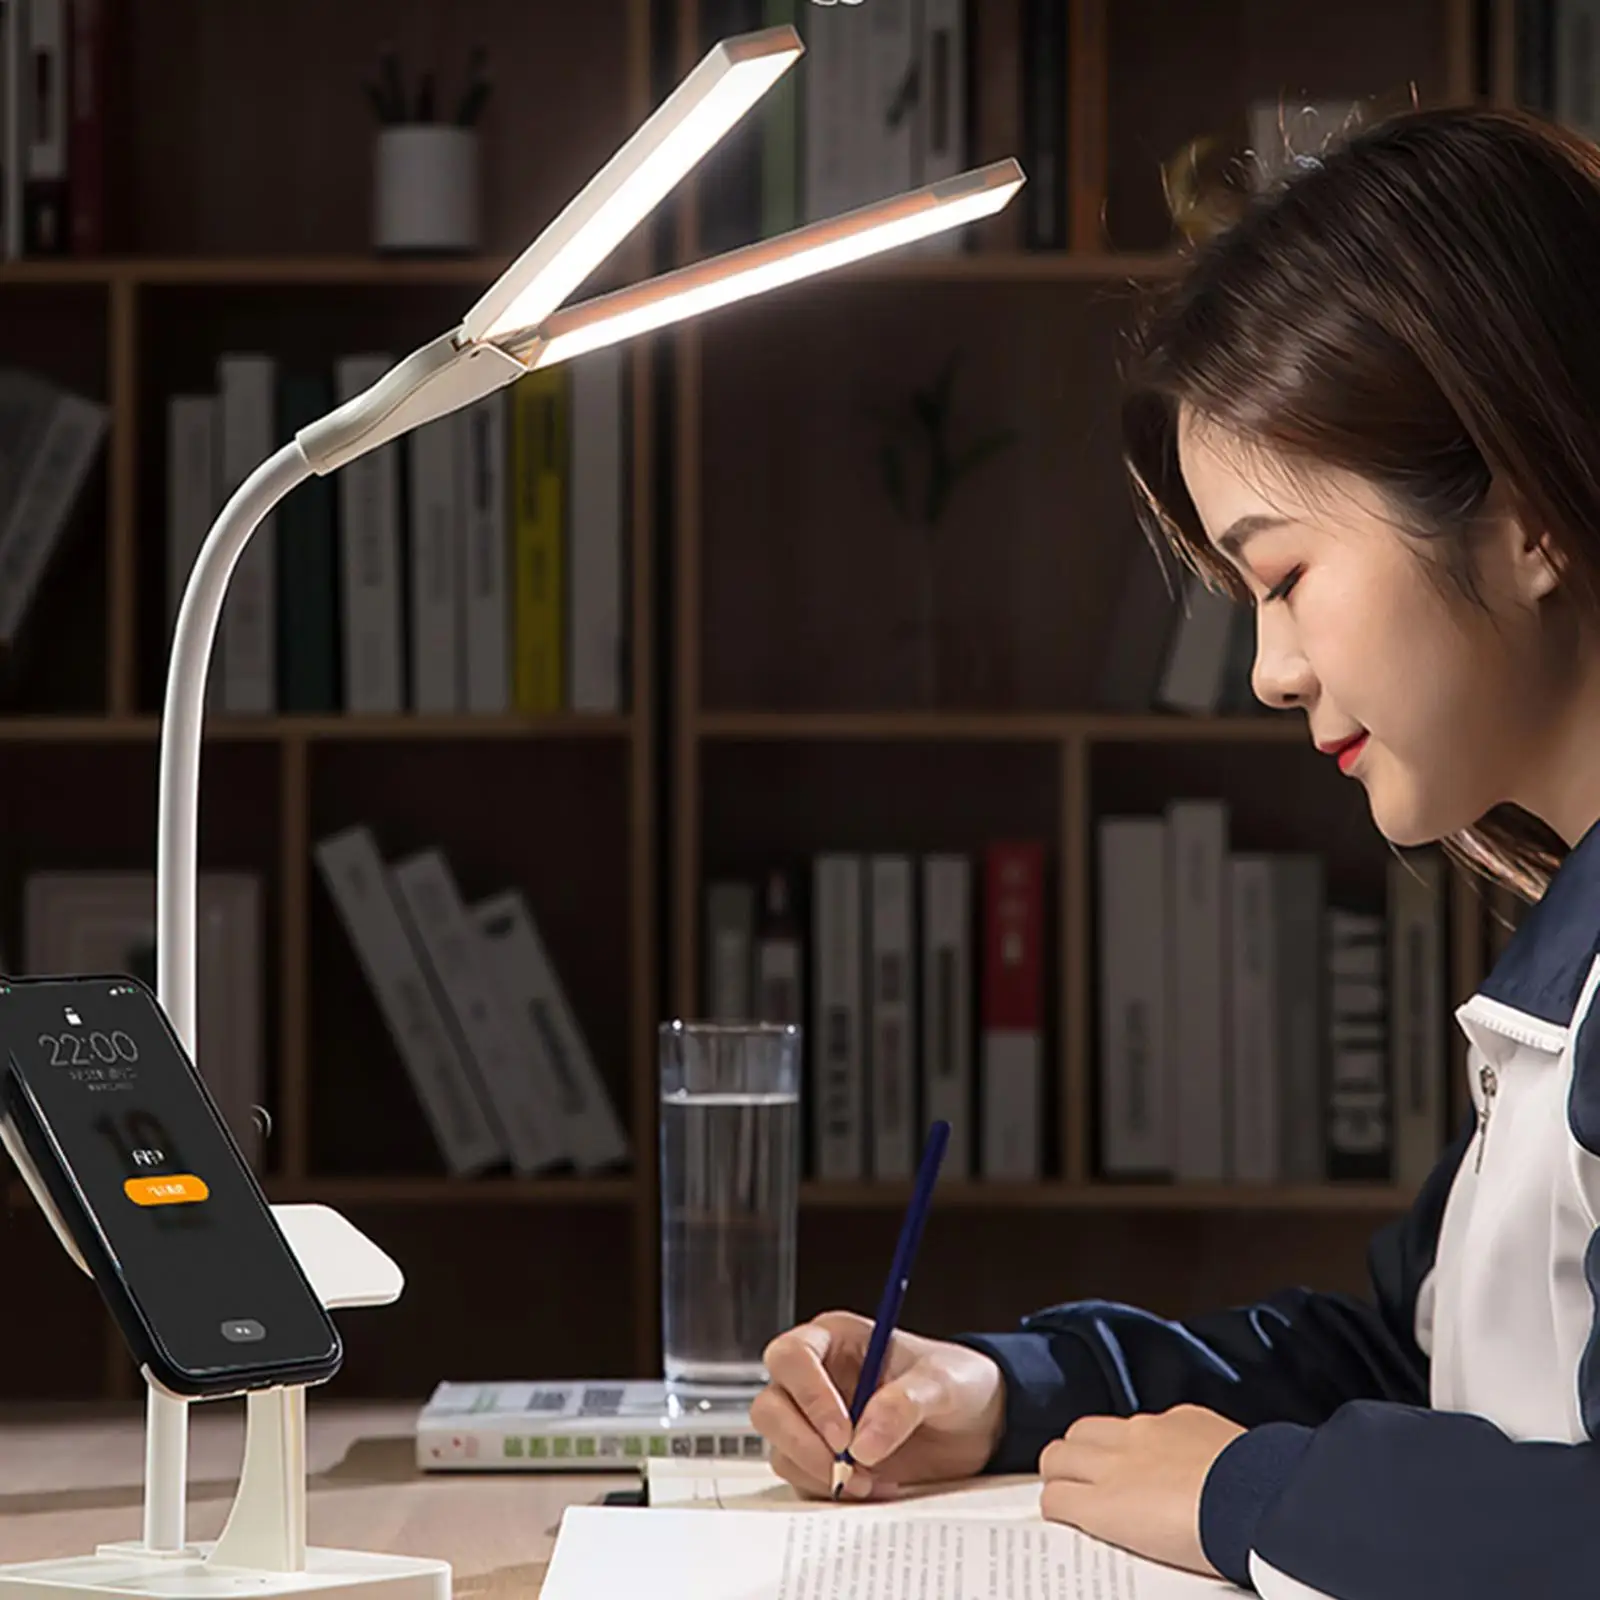 LED Desk Reading Lamp Touch Control 3 Colors Dimmable USB Bedroom